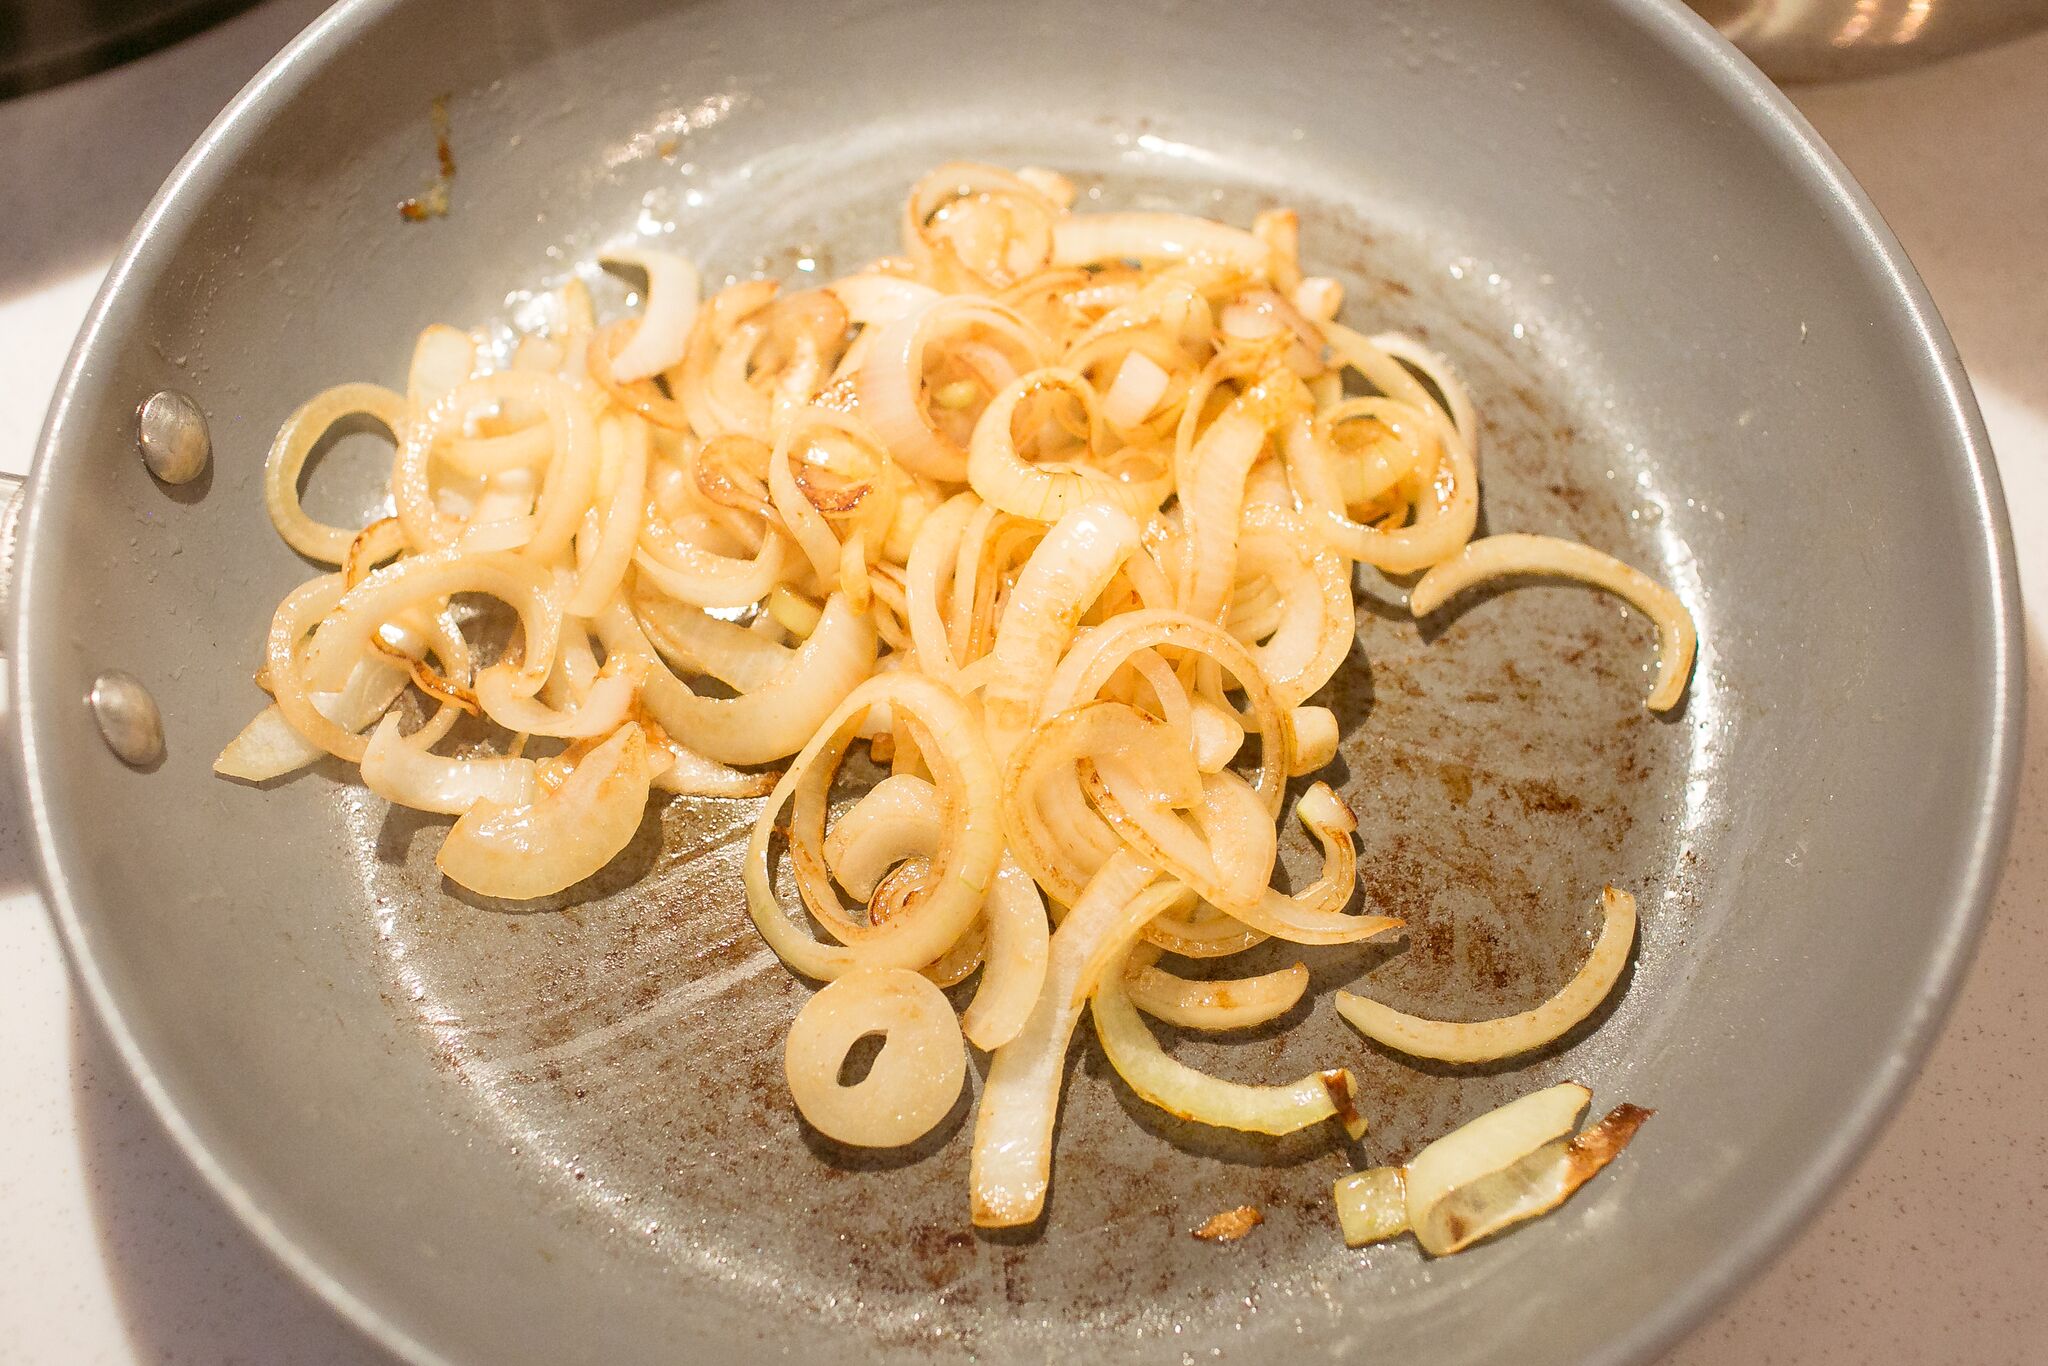 Cut onions and cook in oil until caramelized 